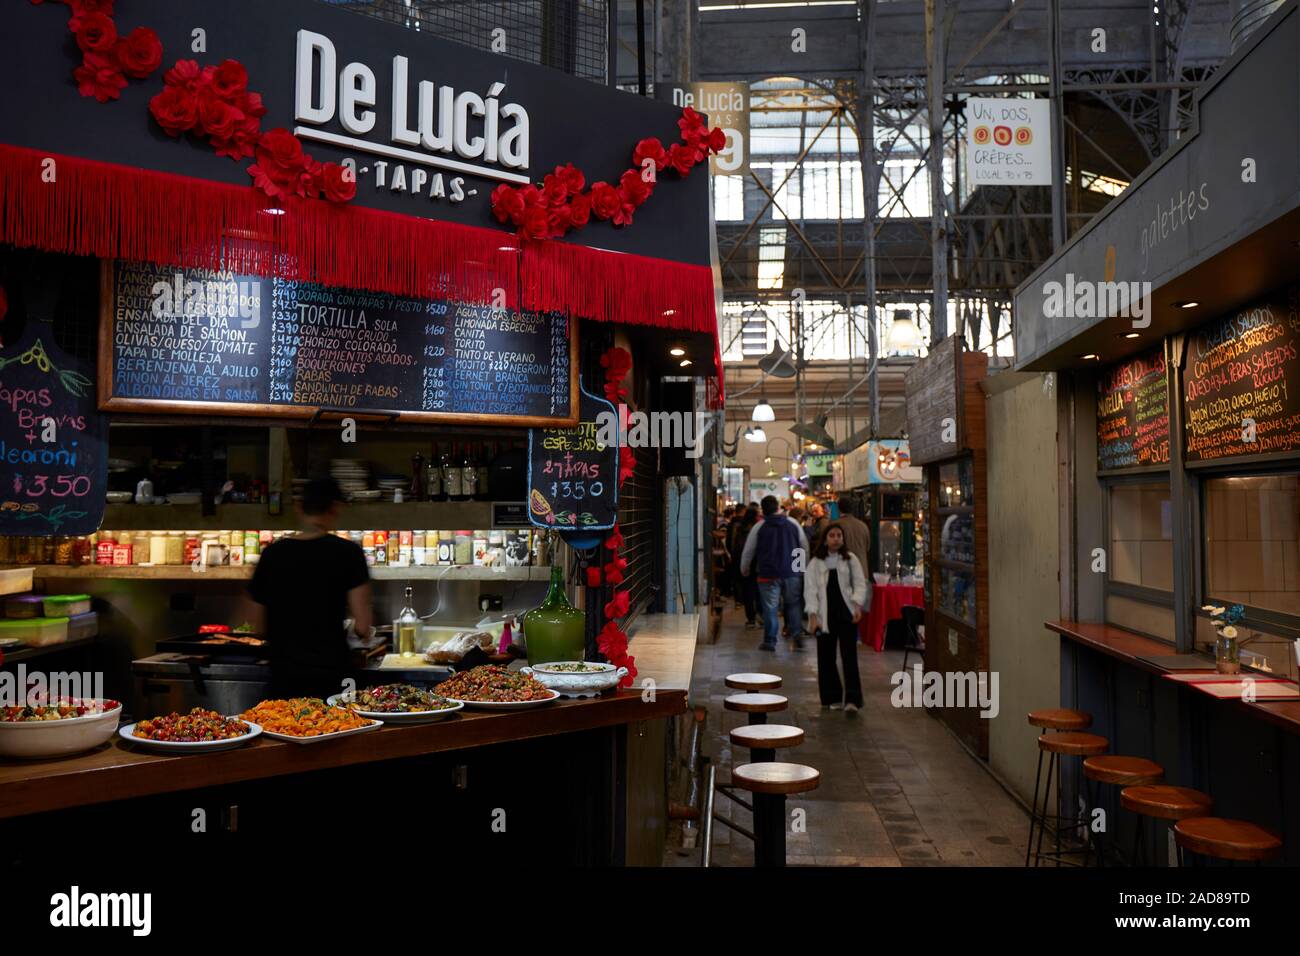 A food stand inside the San Telmo market, Buenos Aires, Argentina. Stock Photo